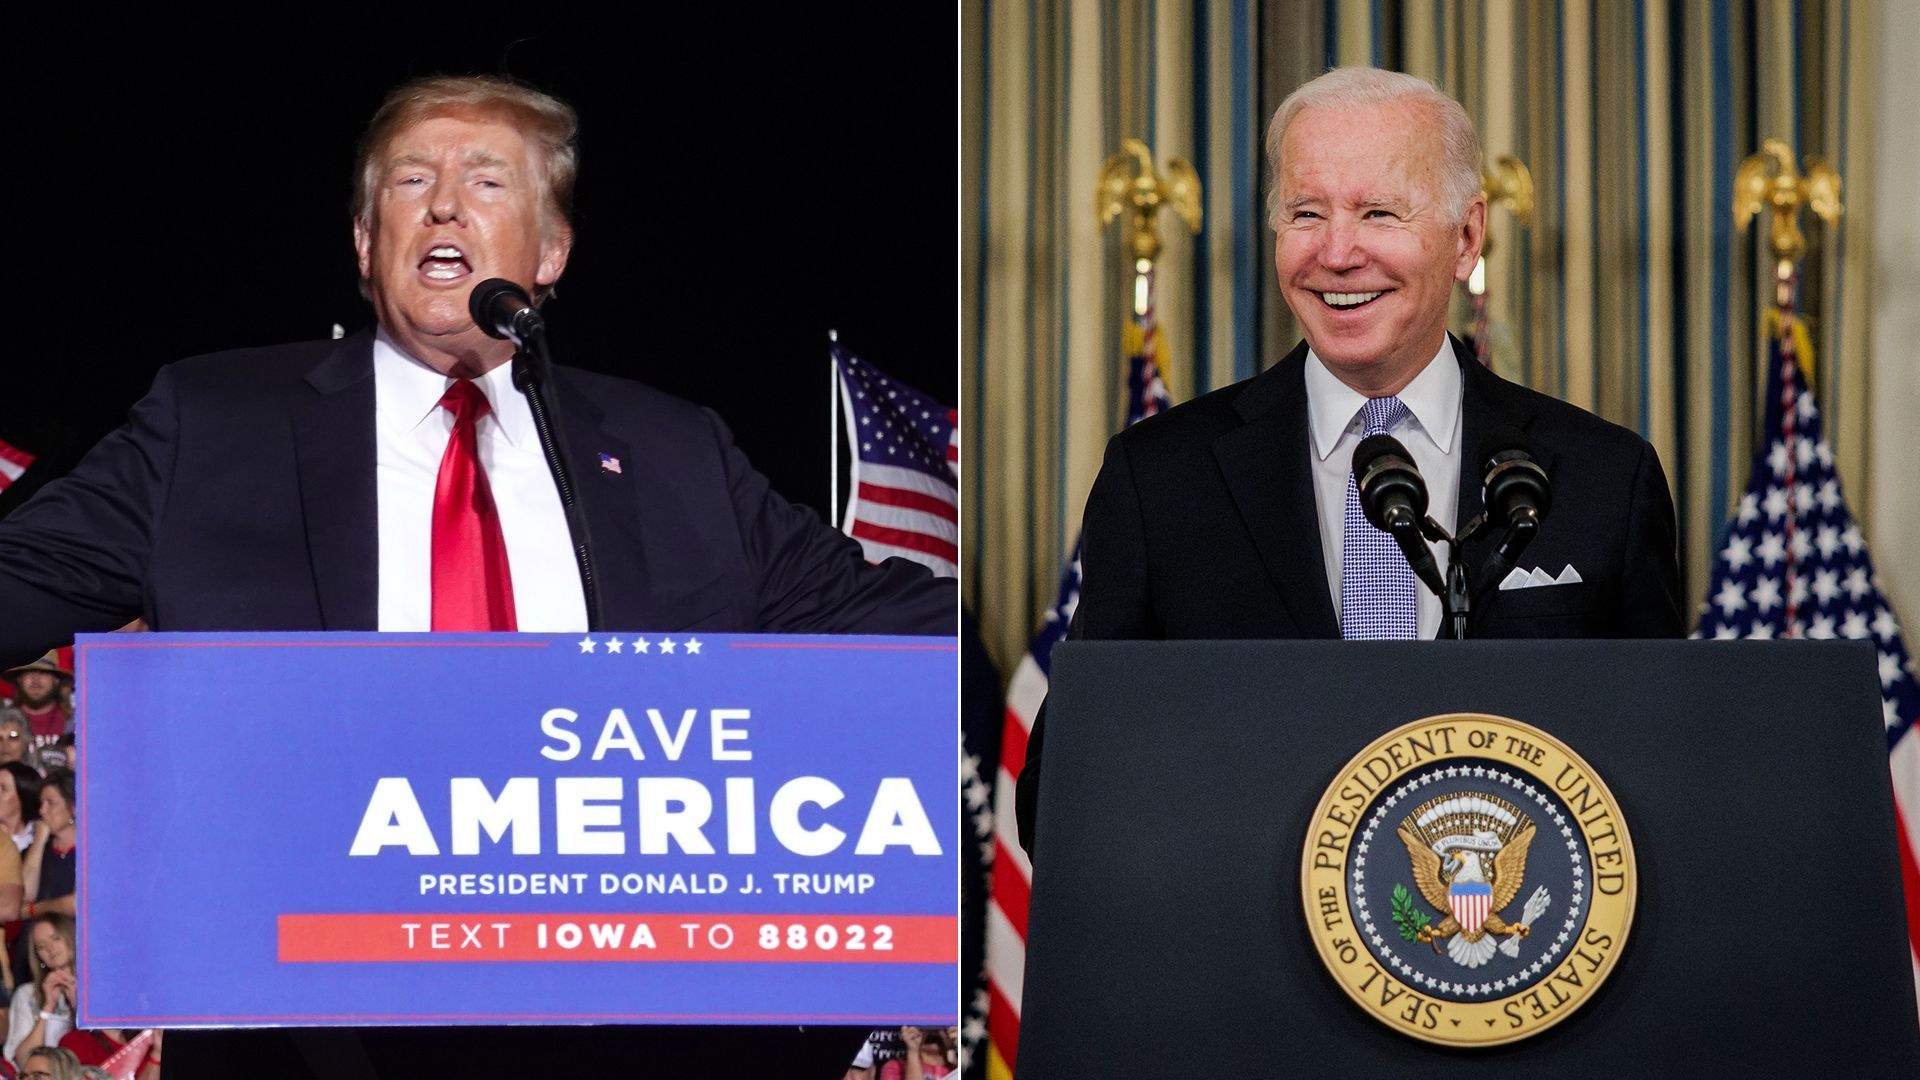 Side-by-side photos of former President Donald Trump and President Joe Biden speaking at podiums.